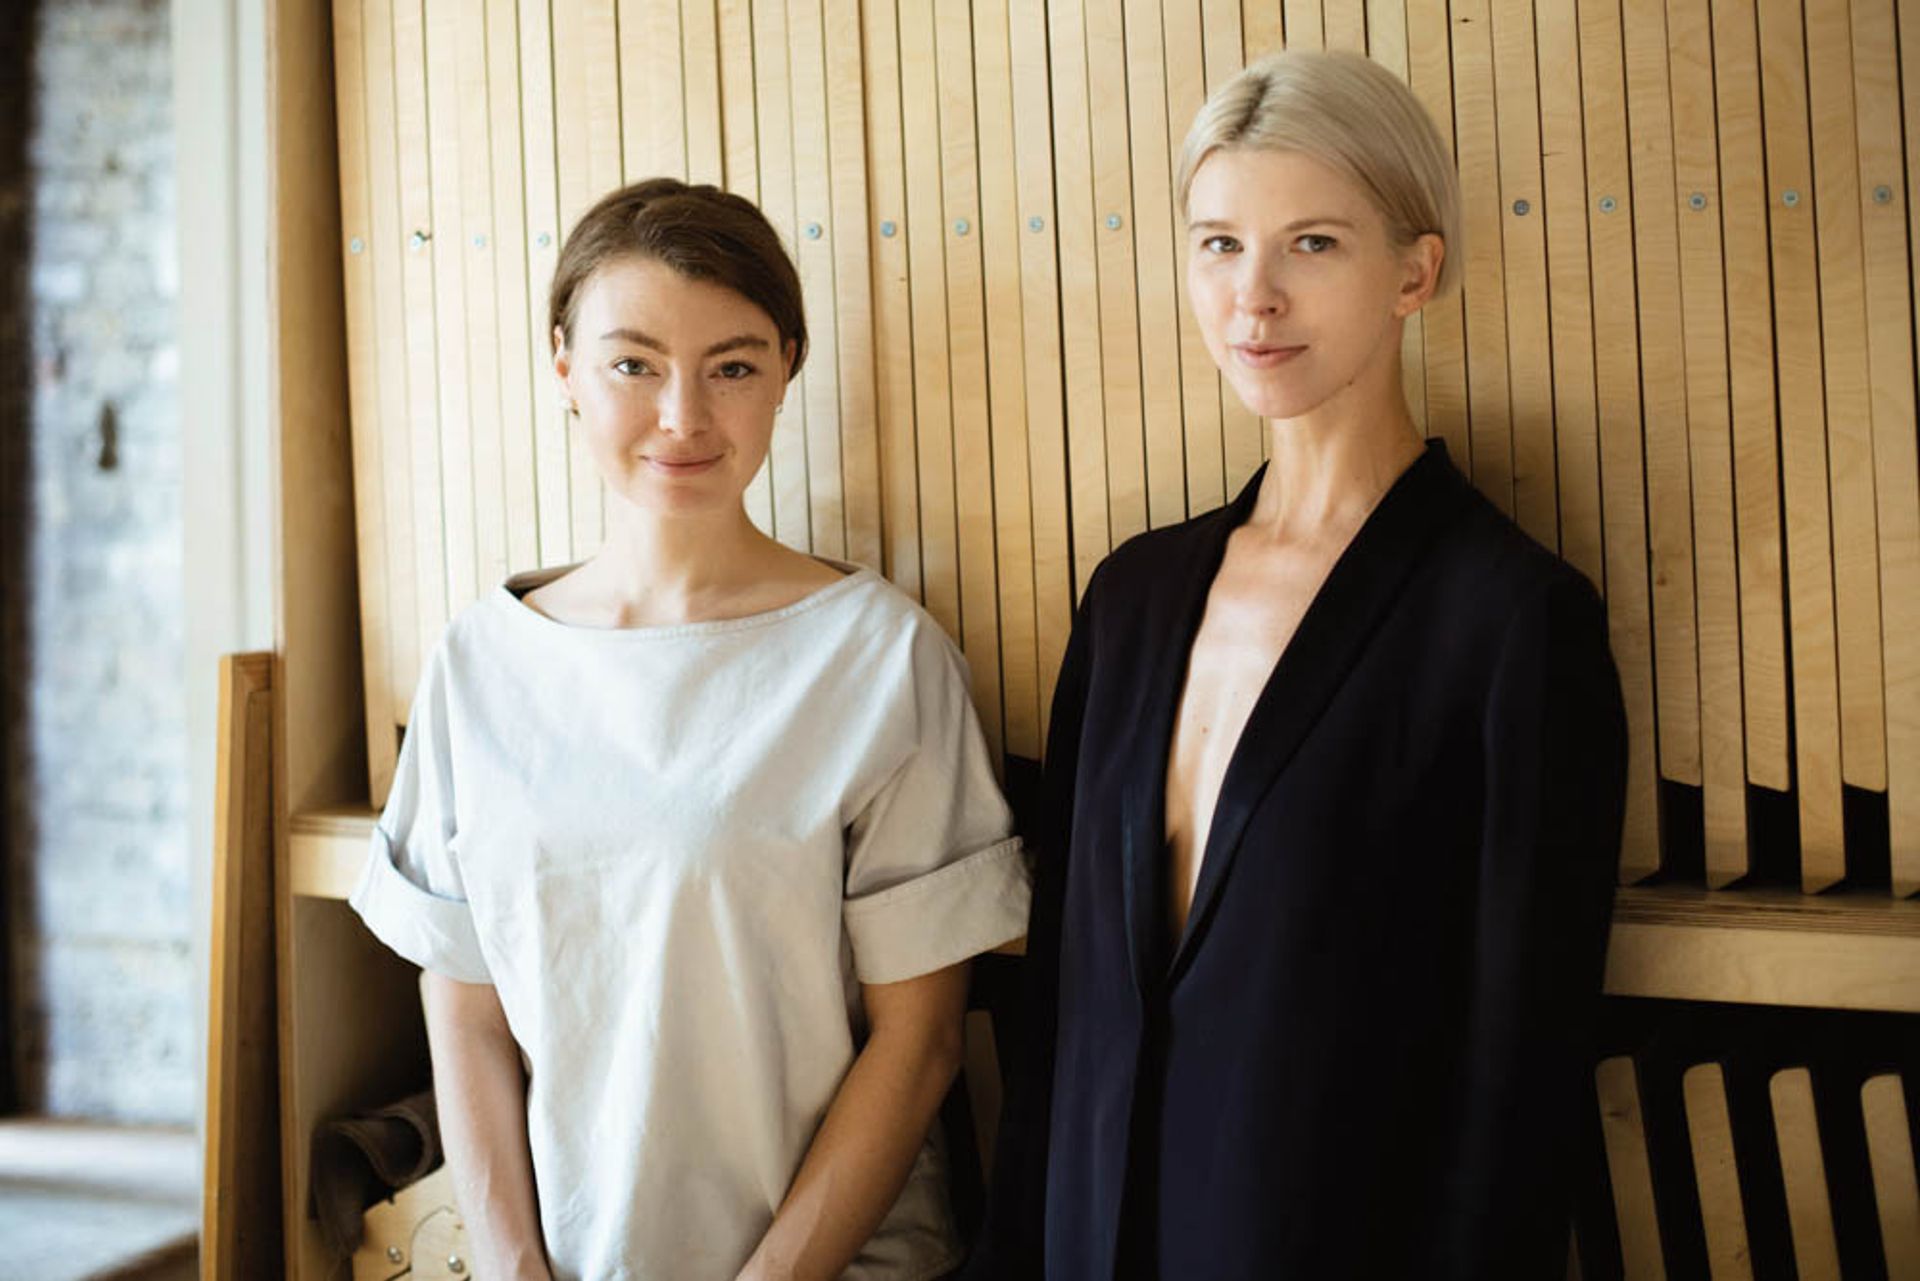 Lizaveta German and Maria Lanko, of the Kyiv-based gallery The Naked Room, are also the curators of the Ukraine pavilion at the Venice Biennale. They have left Kyiv— German to Lviv, Lanko to Italy—but two gallery employees remained to help evacuate some works